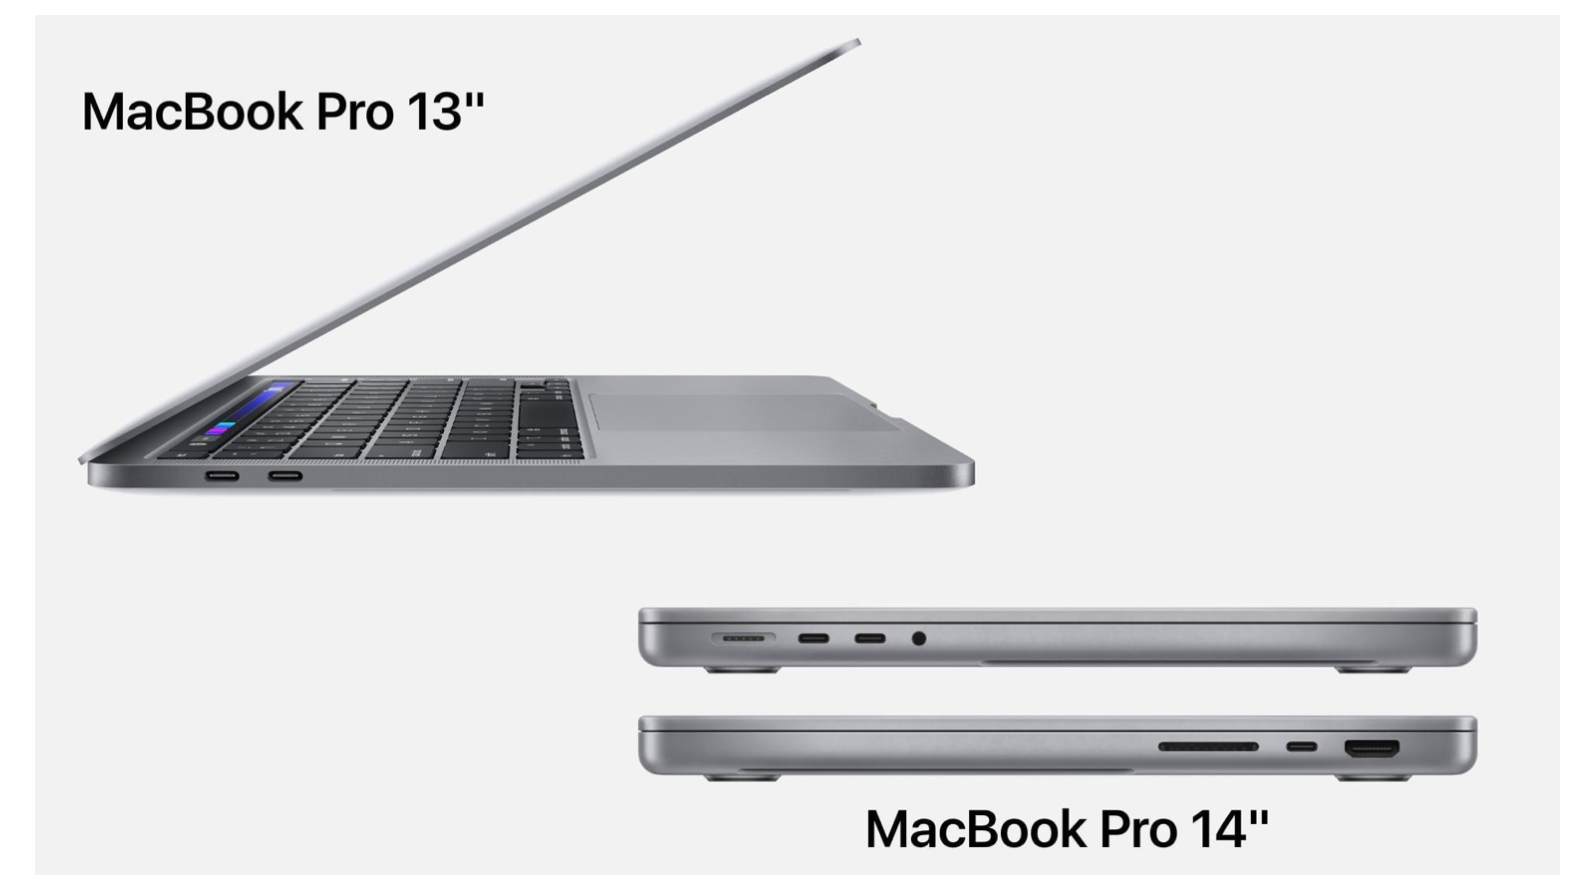 MacBook Pro 13 inch vs MacBook Pro 14 inch What are the differences